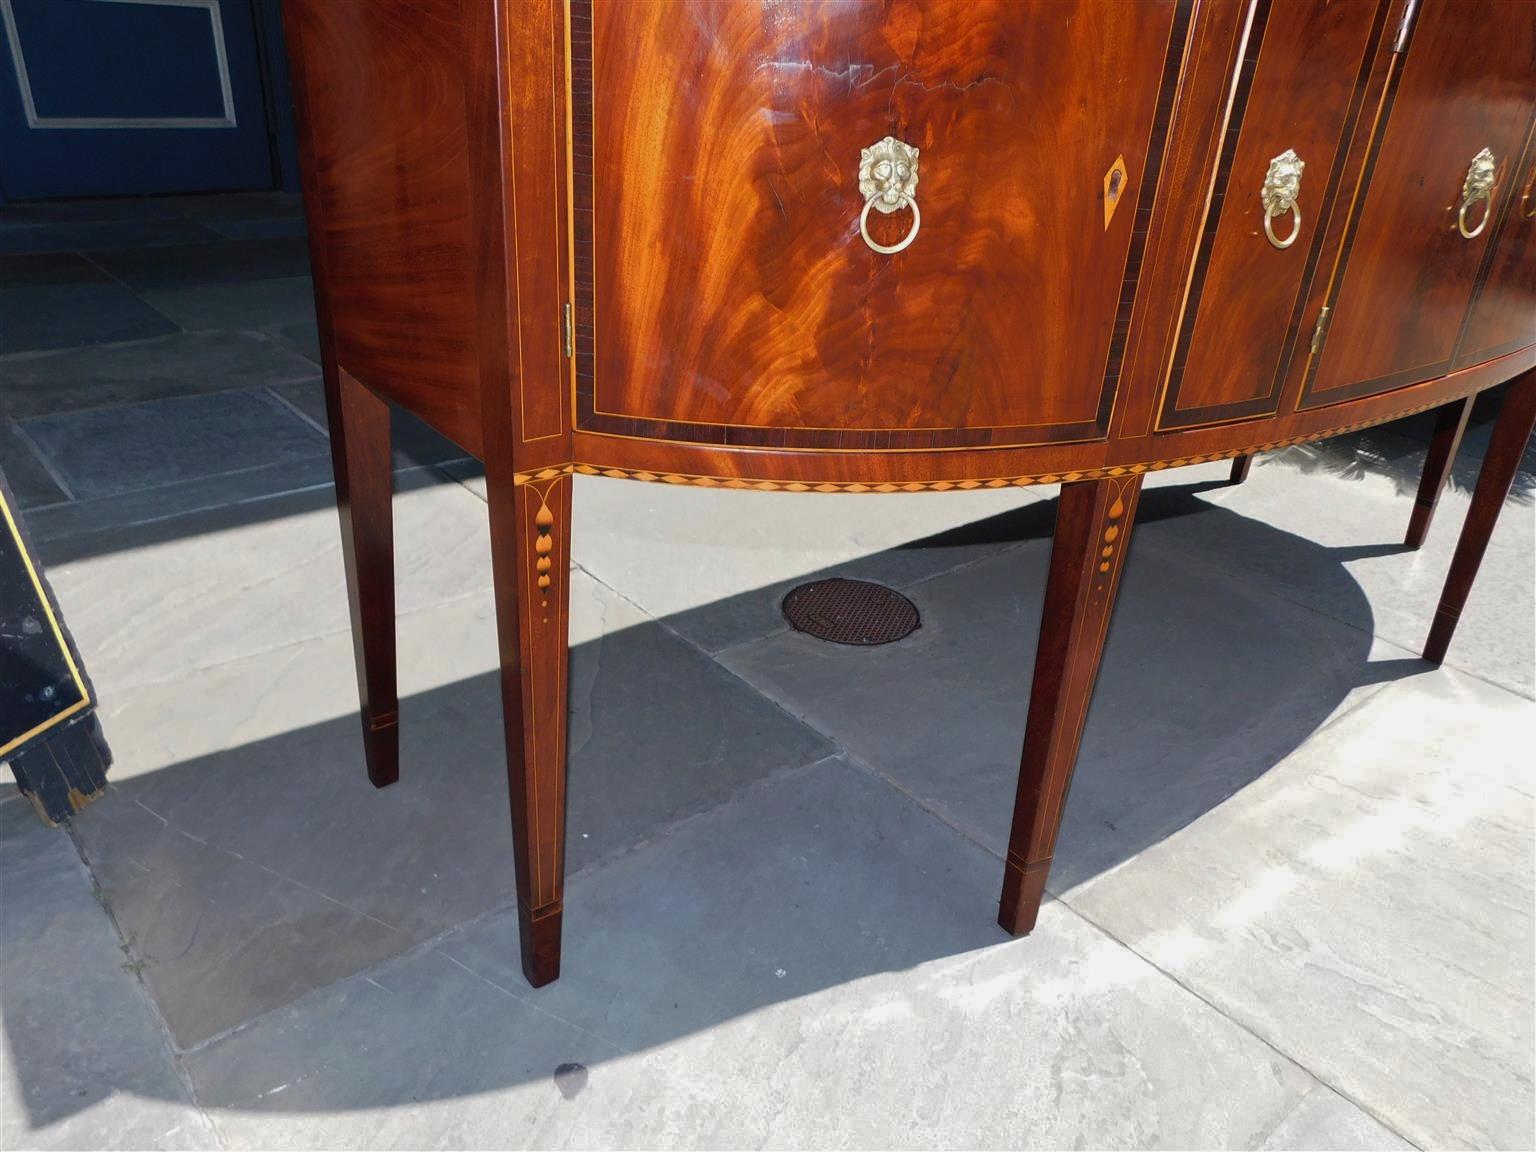 Late 18th Century American Hepplewhite Mahogany Bow Front Satinwood Inlaid Sideboard, Circa 1780 For Sale